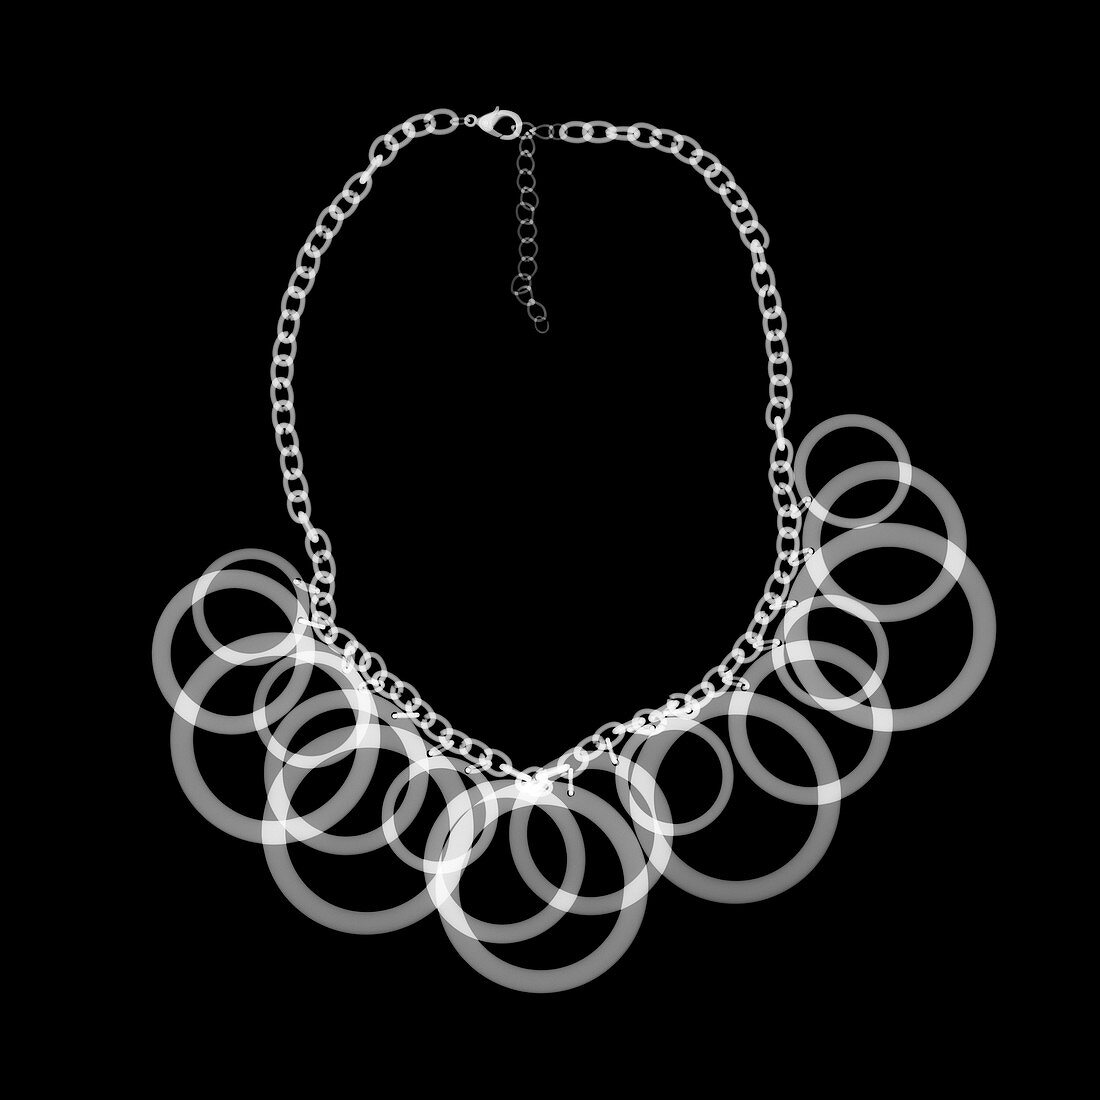 Necklace, X-ray